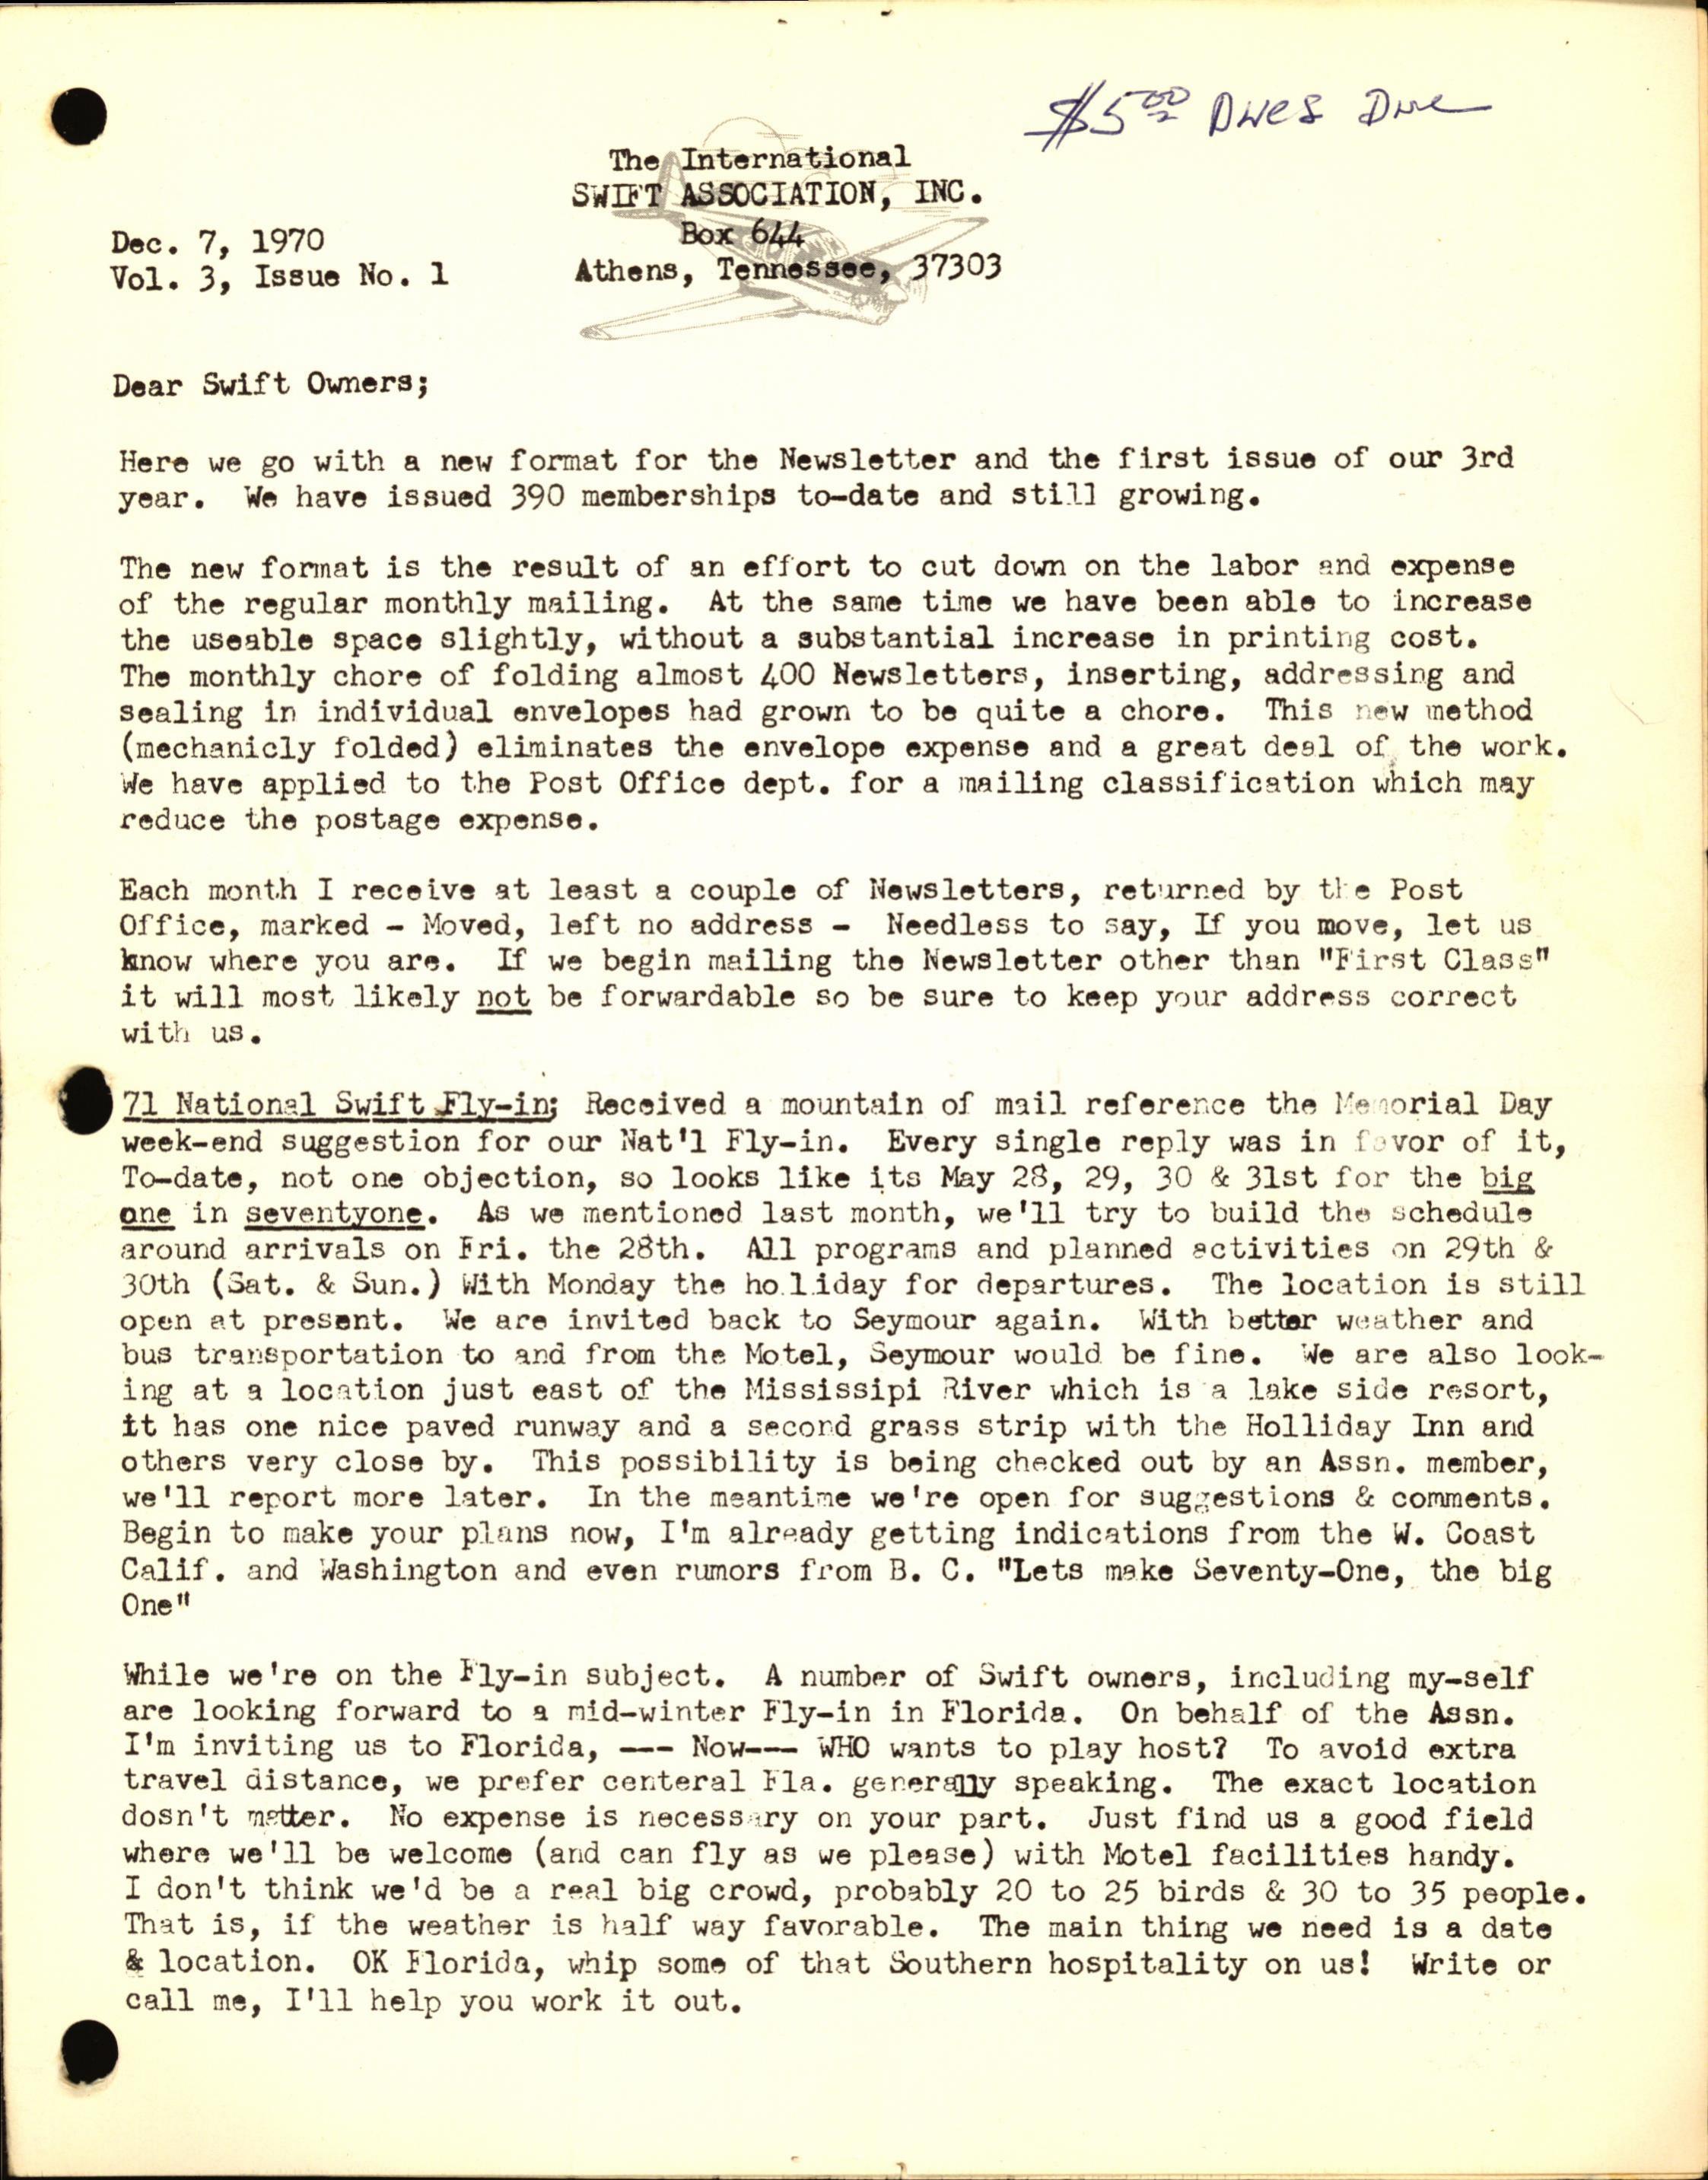 Sample page 1 from AirCorps Library document: December 1970